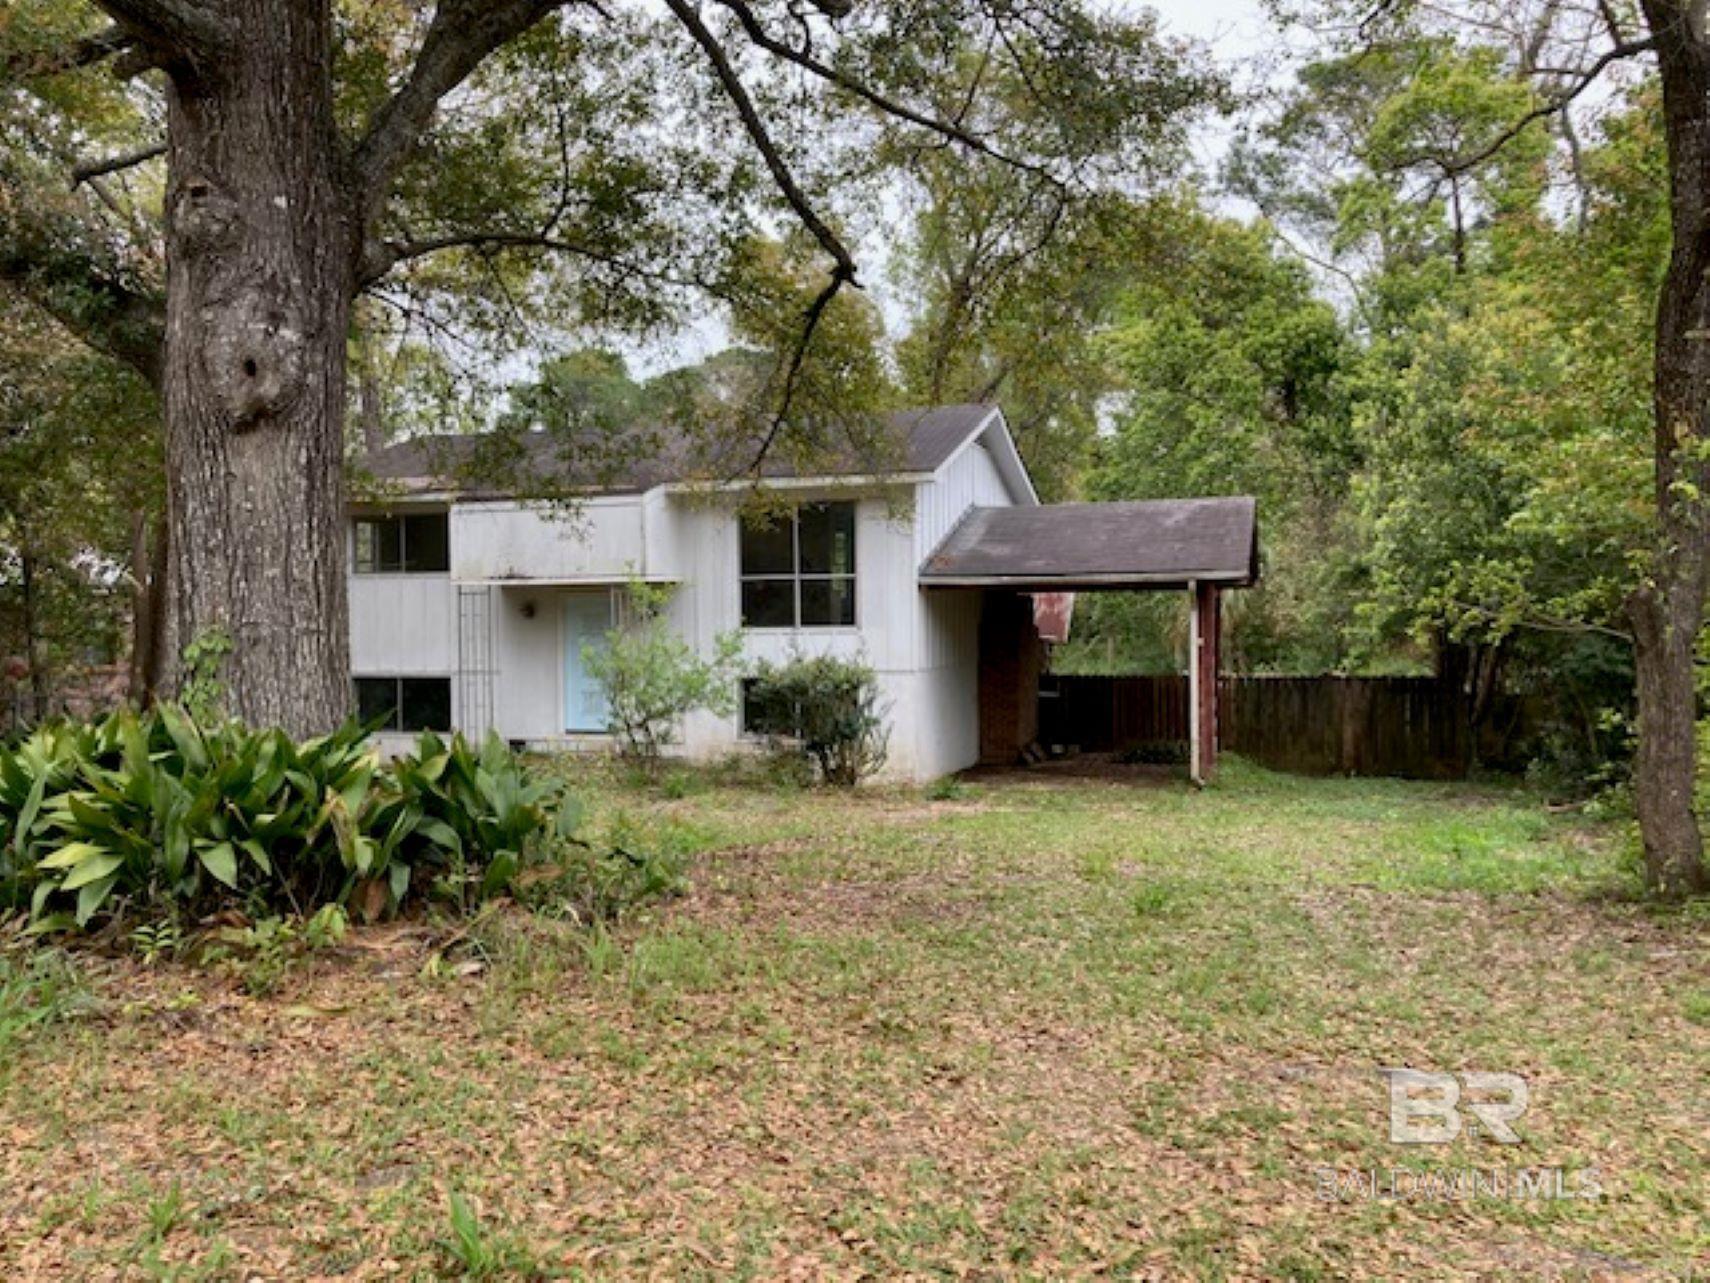 This is a real Fairhope fixer upper or rebuild on this great deep lot within walking distance to downtown.  The beautiful oak tree in the front yard adds charm and character to the property. Rear access to property is available.  There are two rooms plus a den downstairs.  If this property aligns with your vision and budget, this could be an exciting opportunity to create your dream home or investment property in Fairhope. Sold as is.